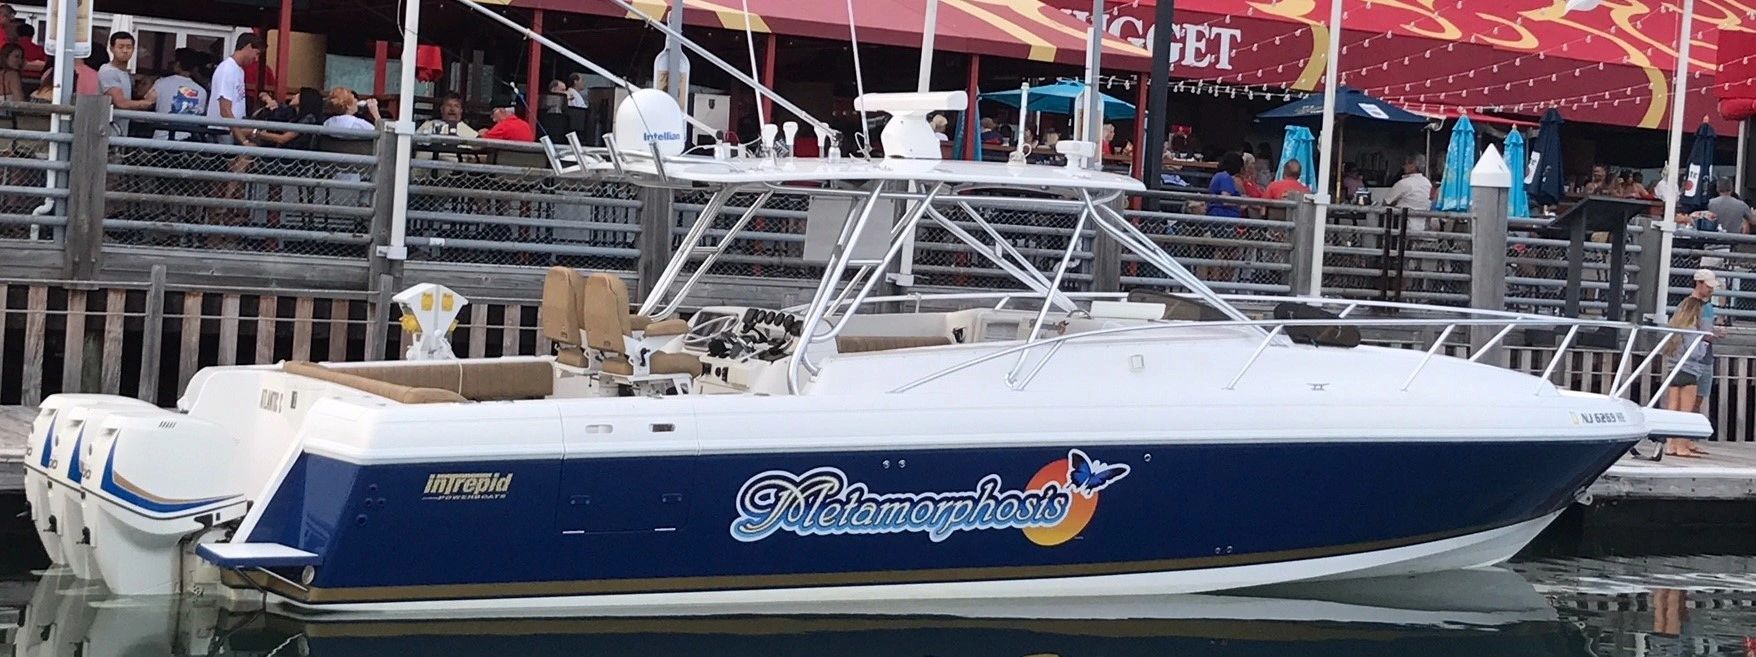 Private Charter Vessel Metamorphosis at the Golden Nugget Marina in Atlantic City
